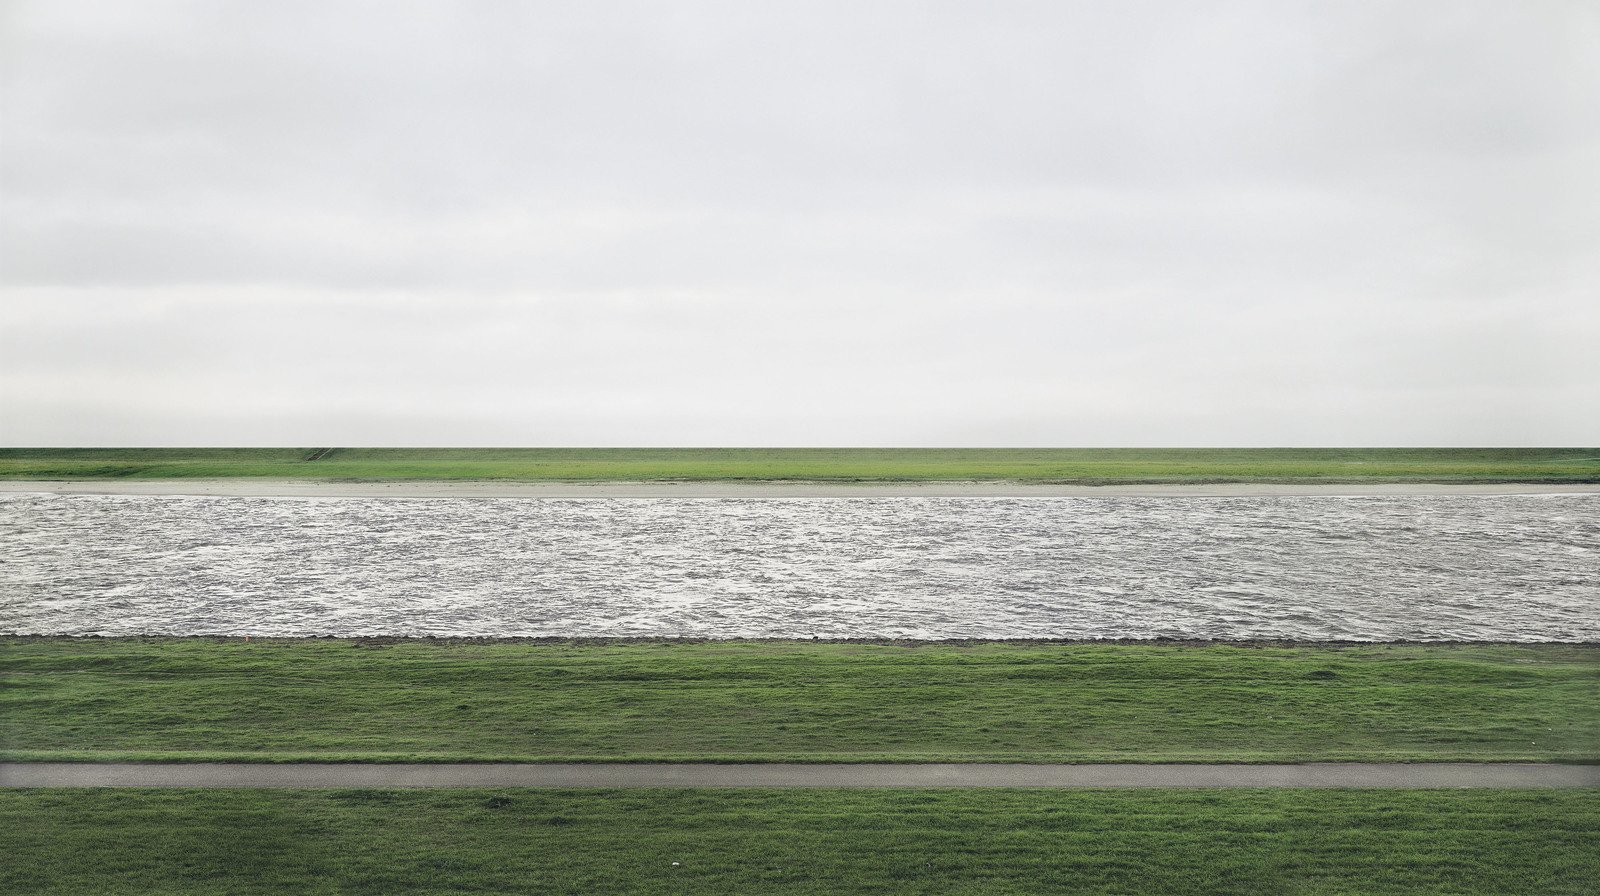 Andreas Gursky – Jeff Wall. A lecture by Irina Kulik